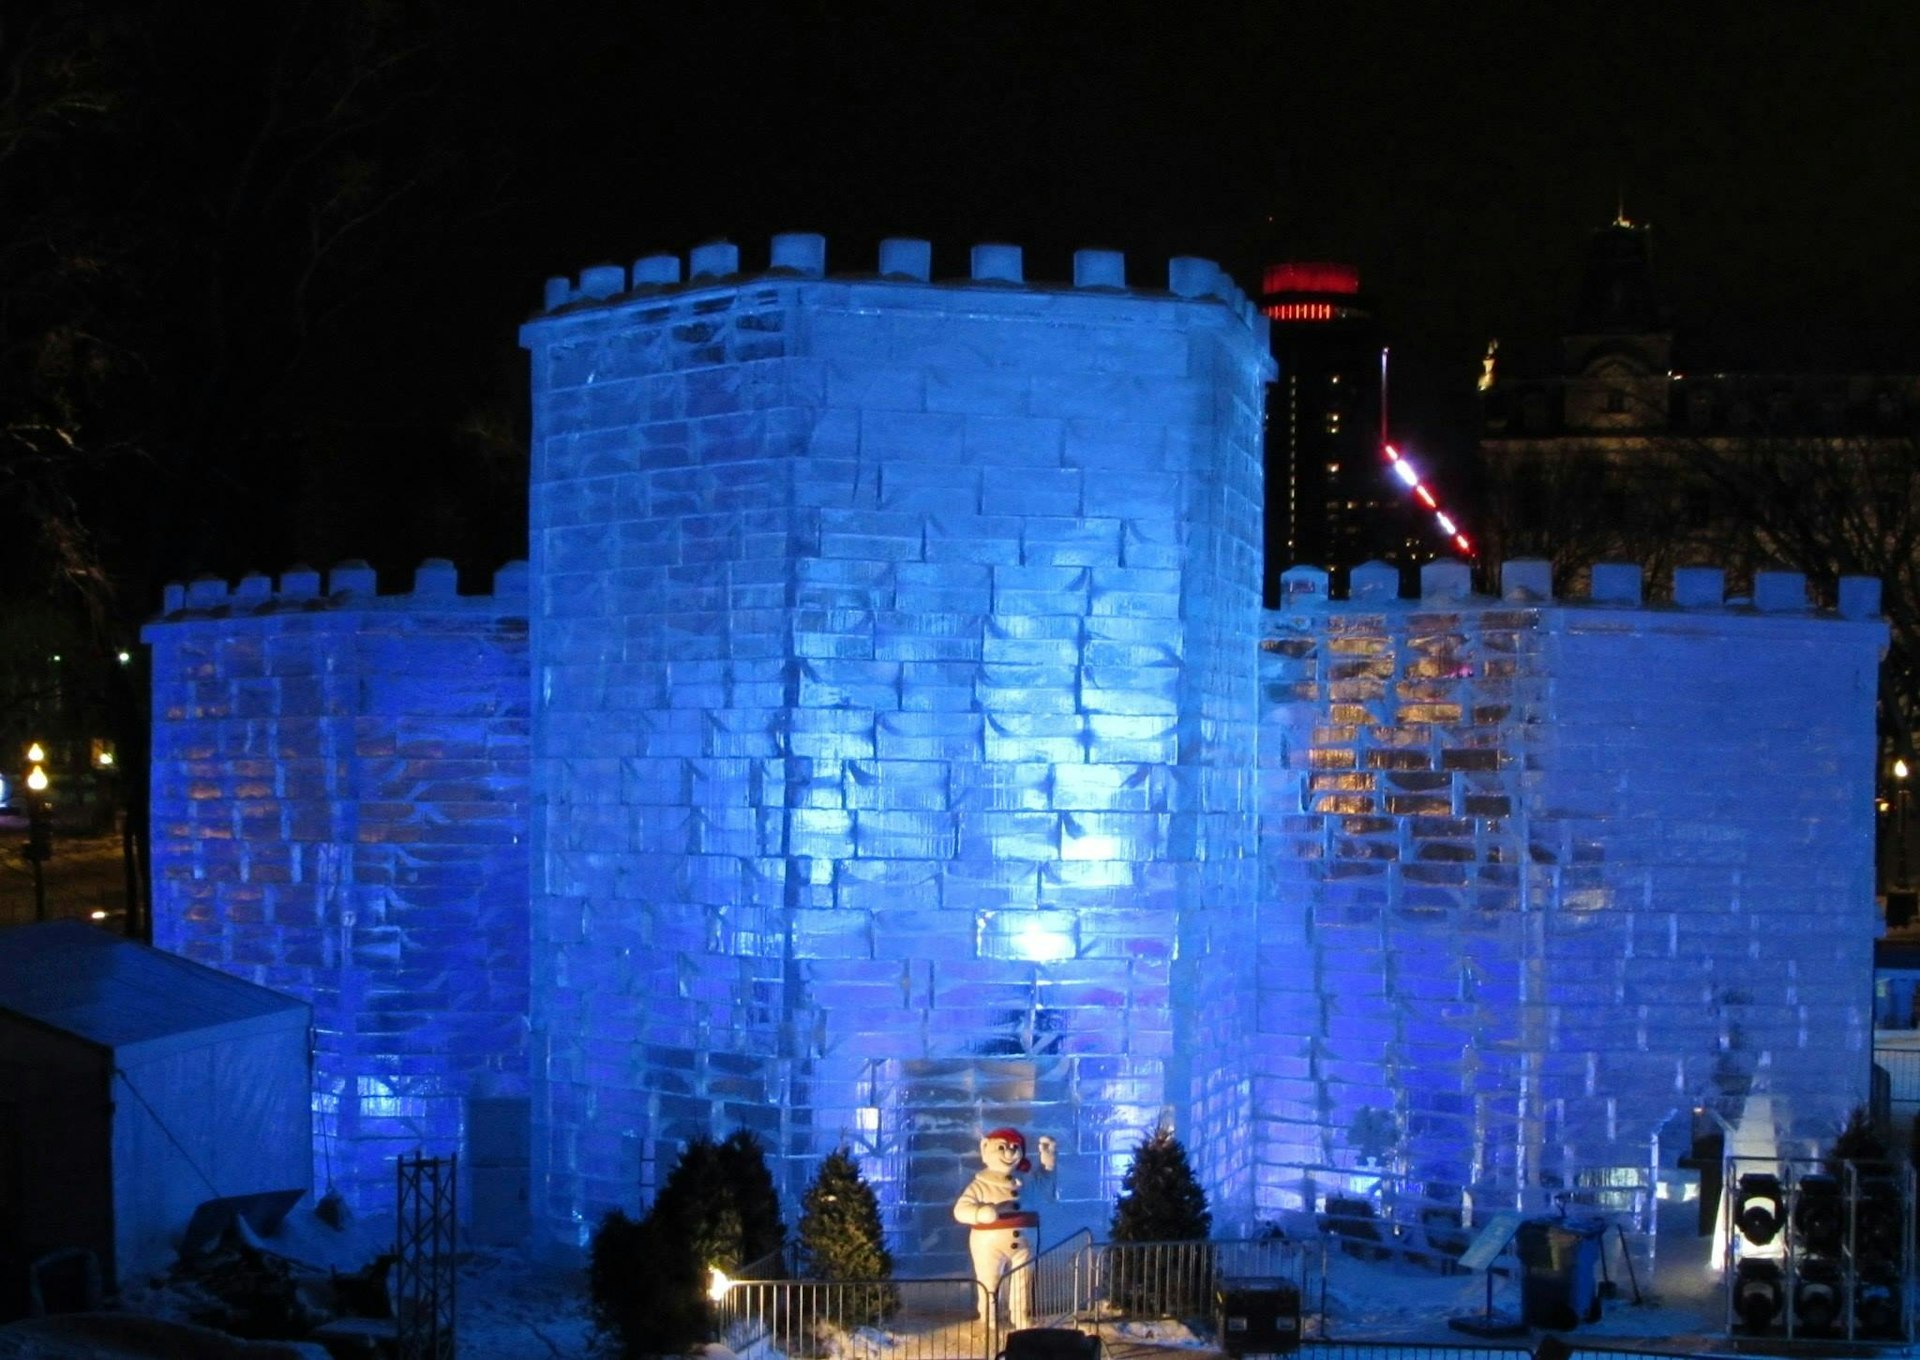 A transparent castle made of giant ice blocks is lit with a blue light from inside, against a pitch black sky in Québec City.